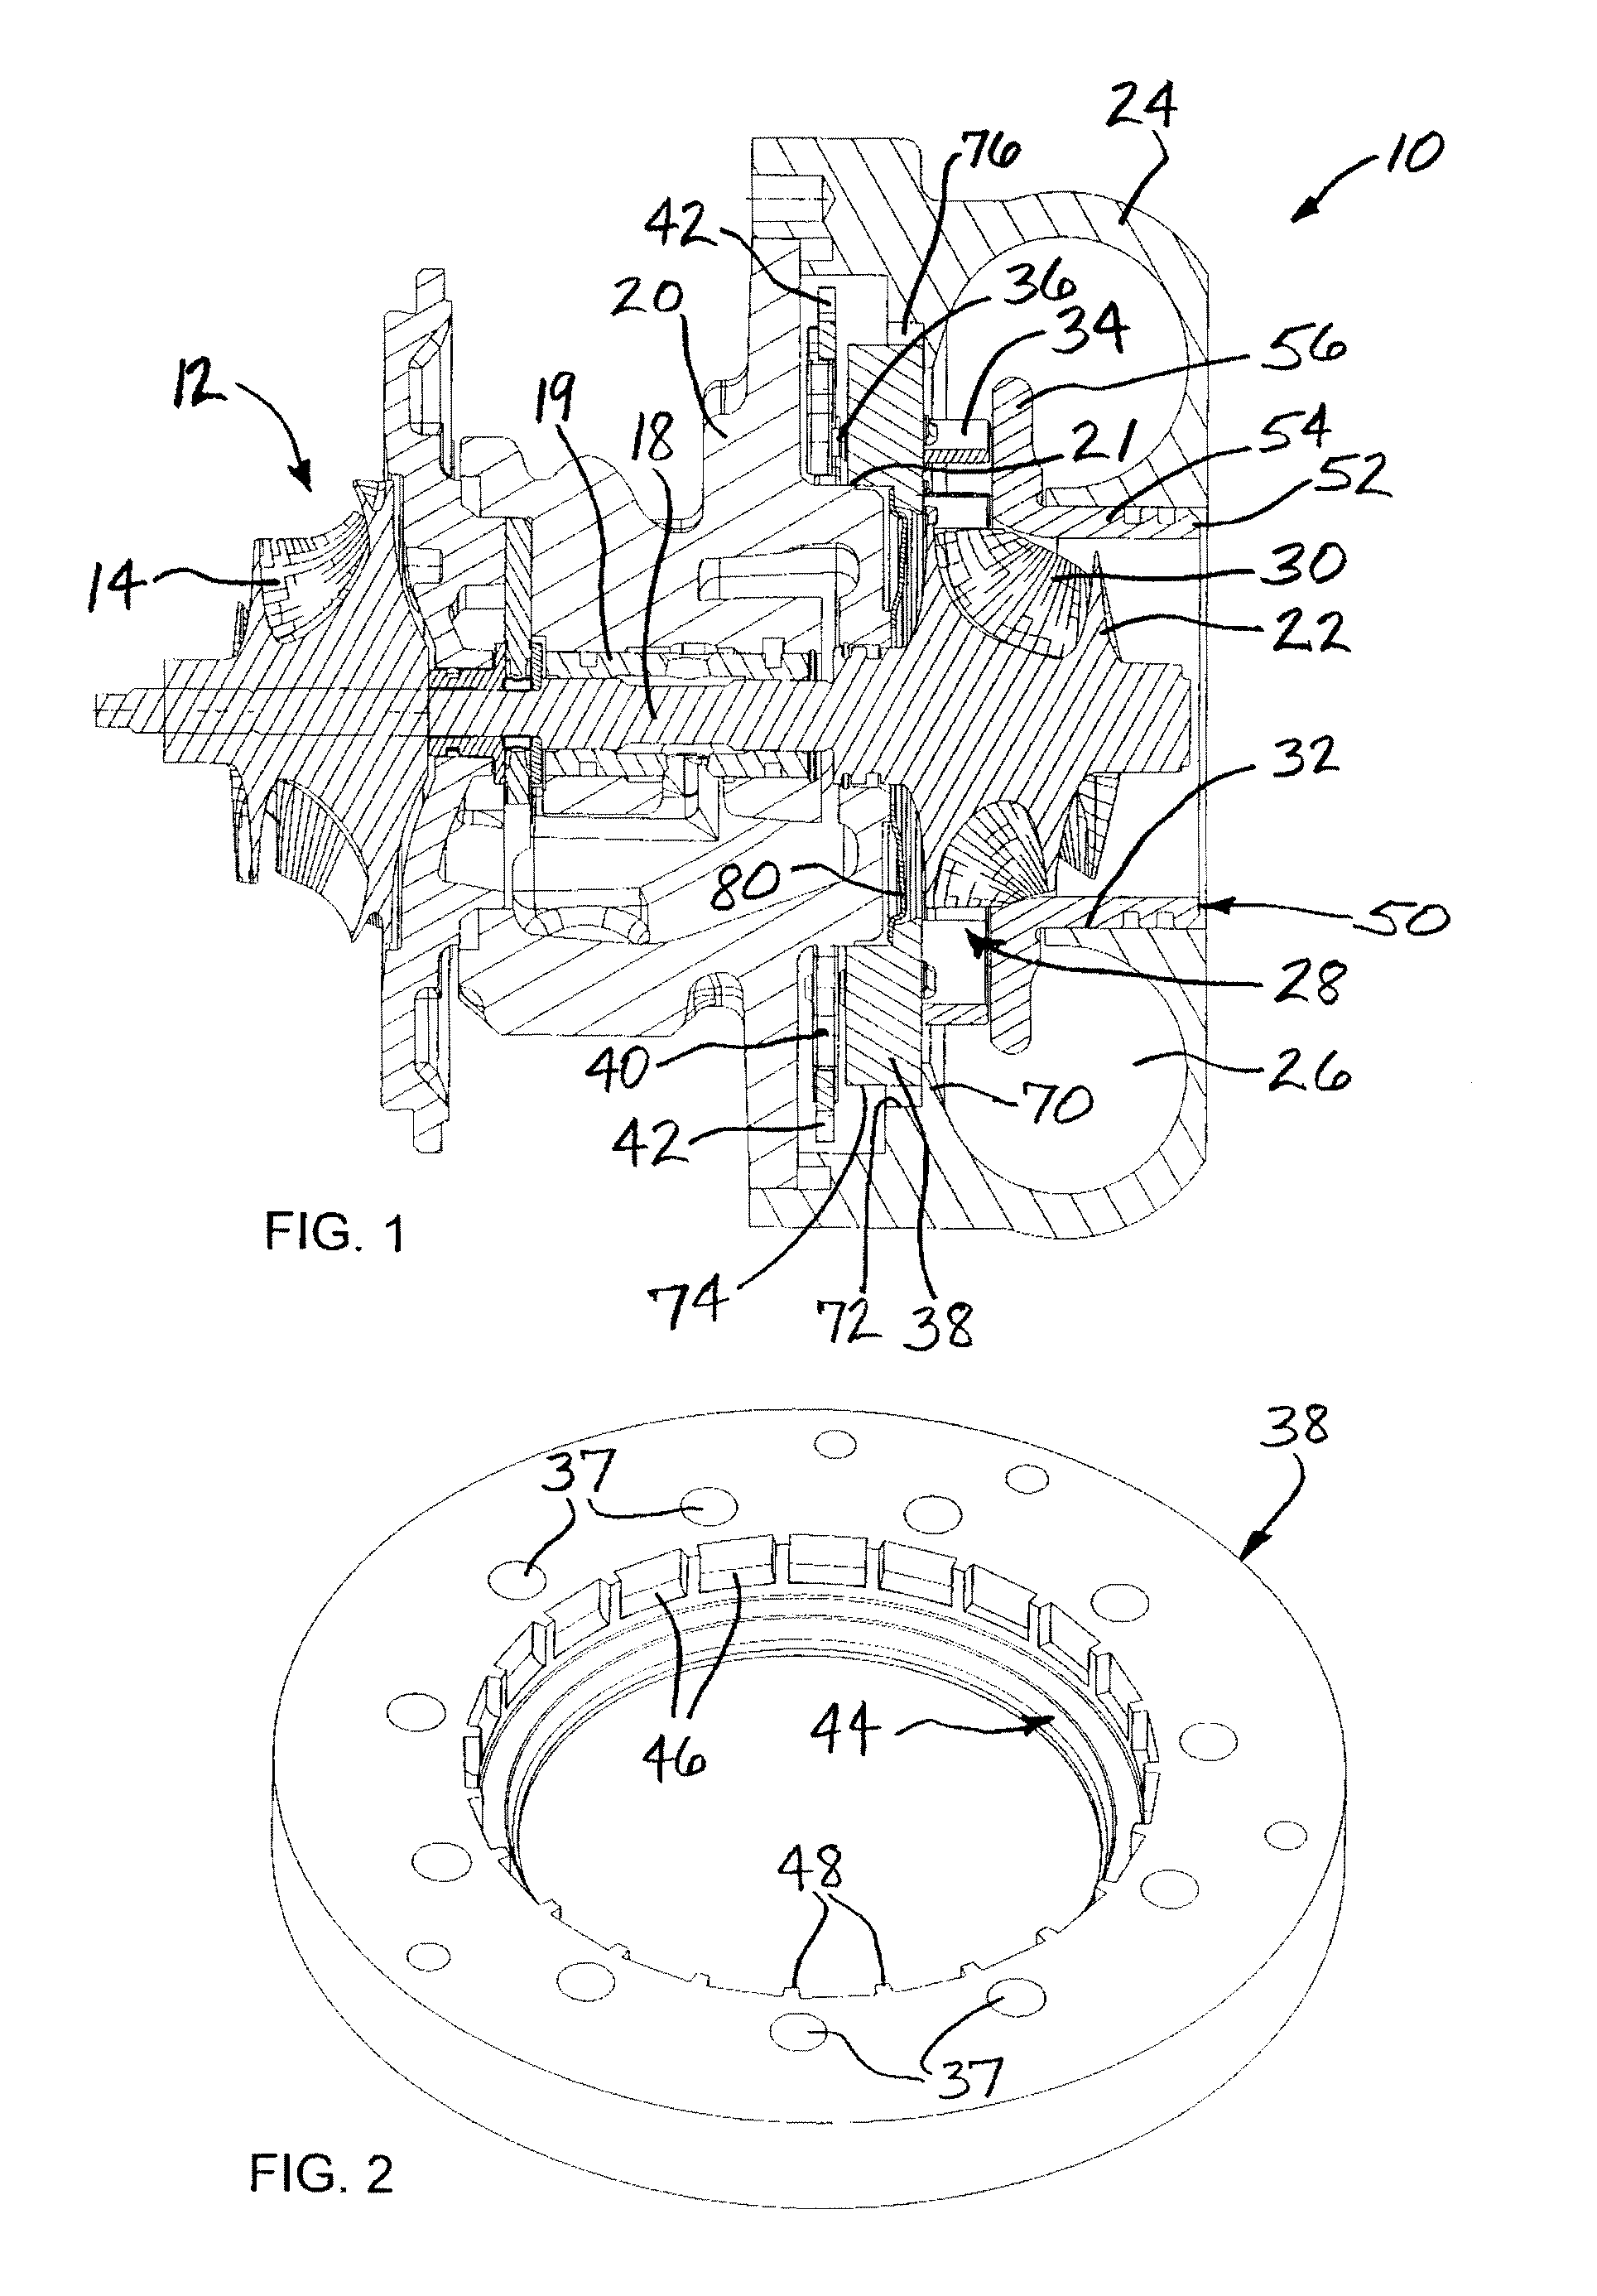 Variable-nozzle cartridge for a turbocharger